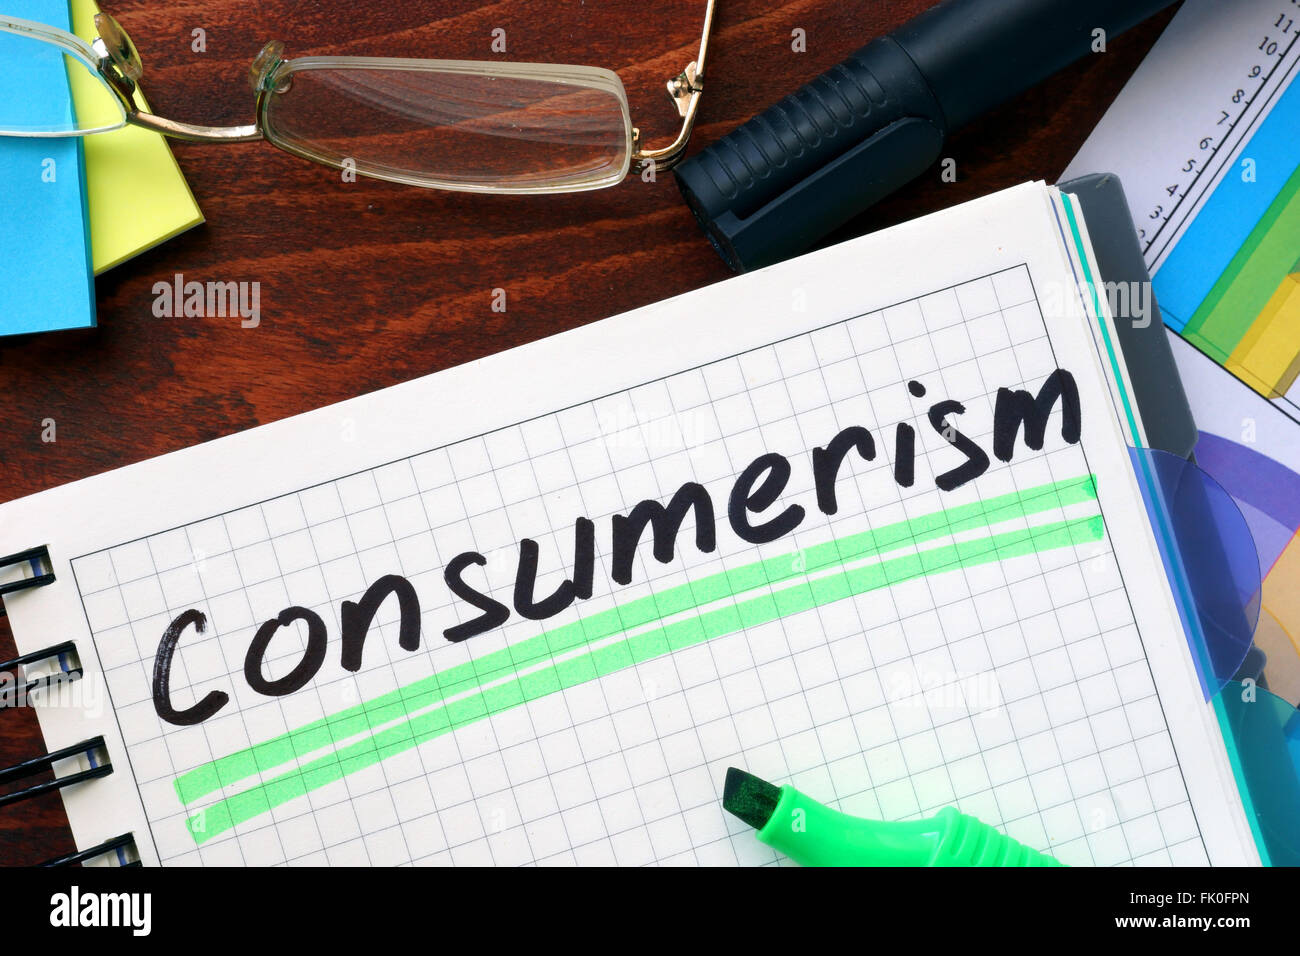 Consumerism concept  written in a notebook on a wooden table. Stock Photo